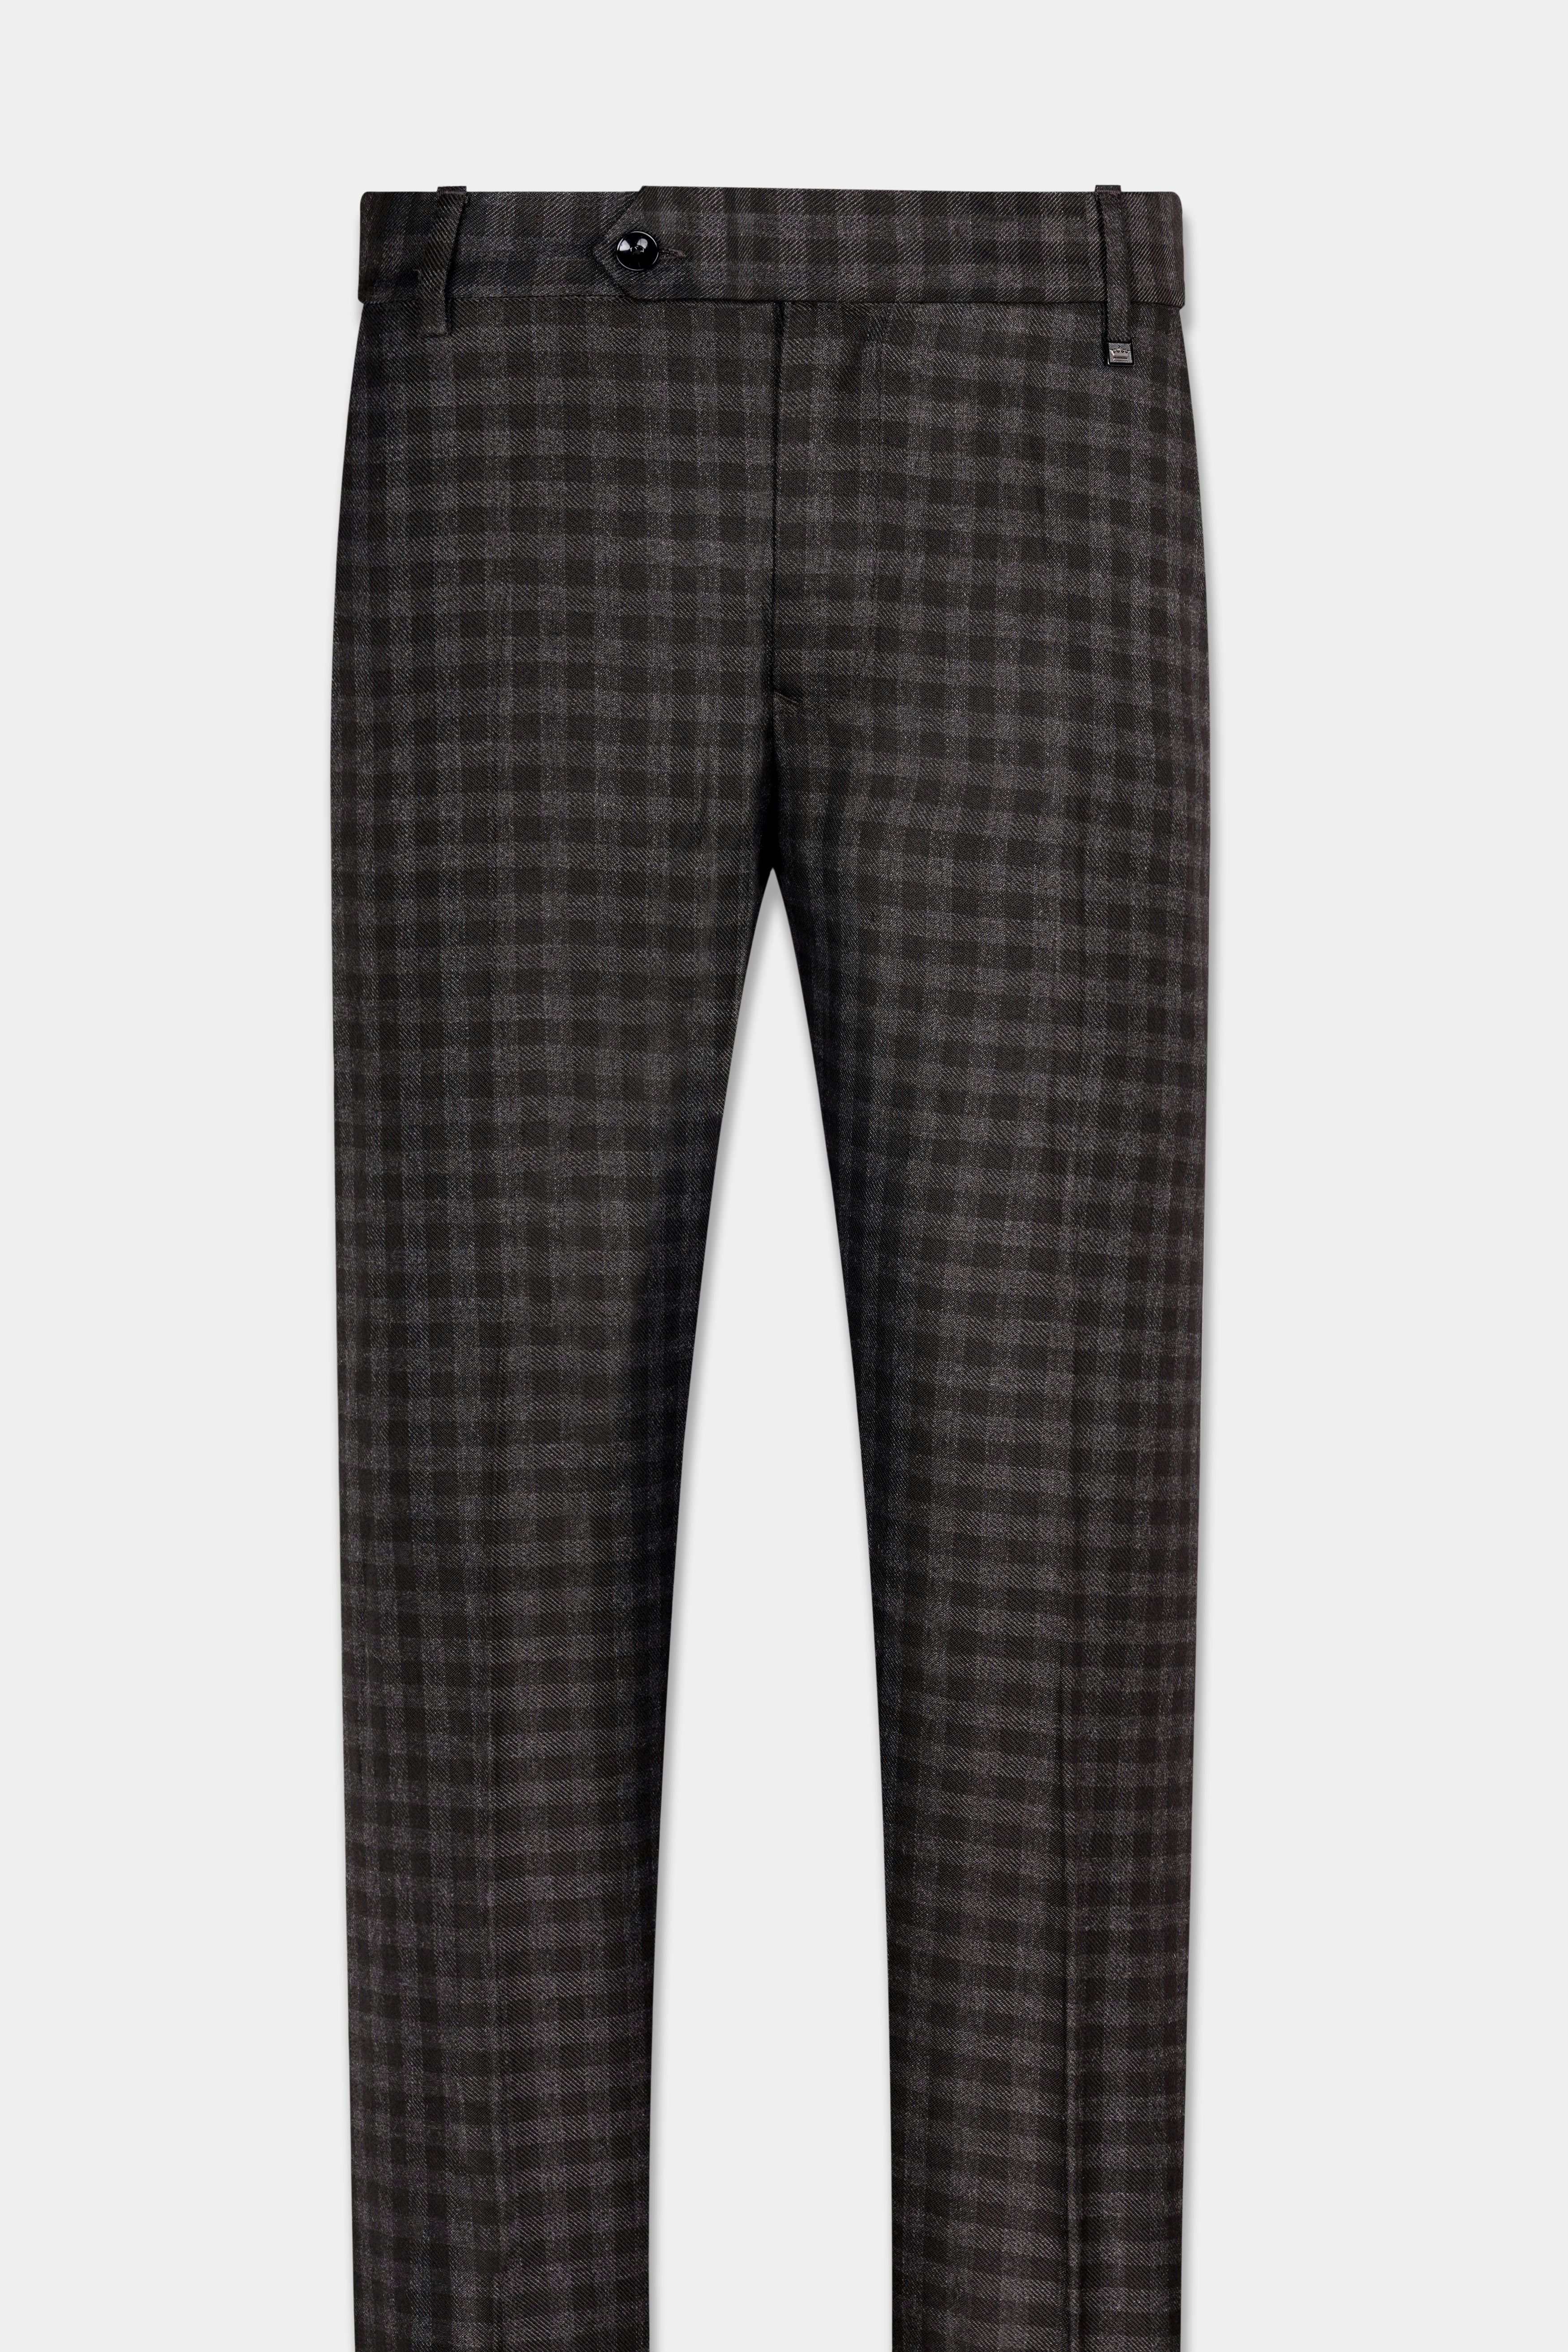 Jade Black and Storm Brown Checkered Wool Rich Pant T2898-SW-28, T2898-SW-30, T2898-SW-32, T2898-SW-34, T2898-SW-36, T2898-SW-38, T2898-SW-40, T2898-SW-42, T2898-SW-44